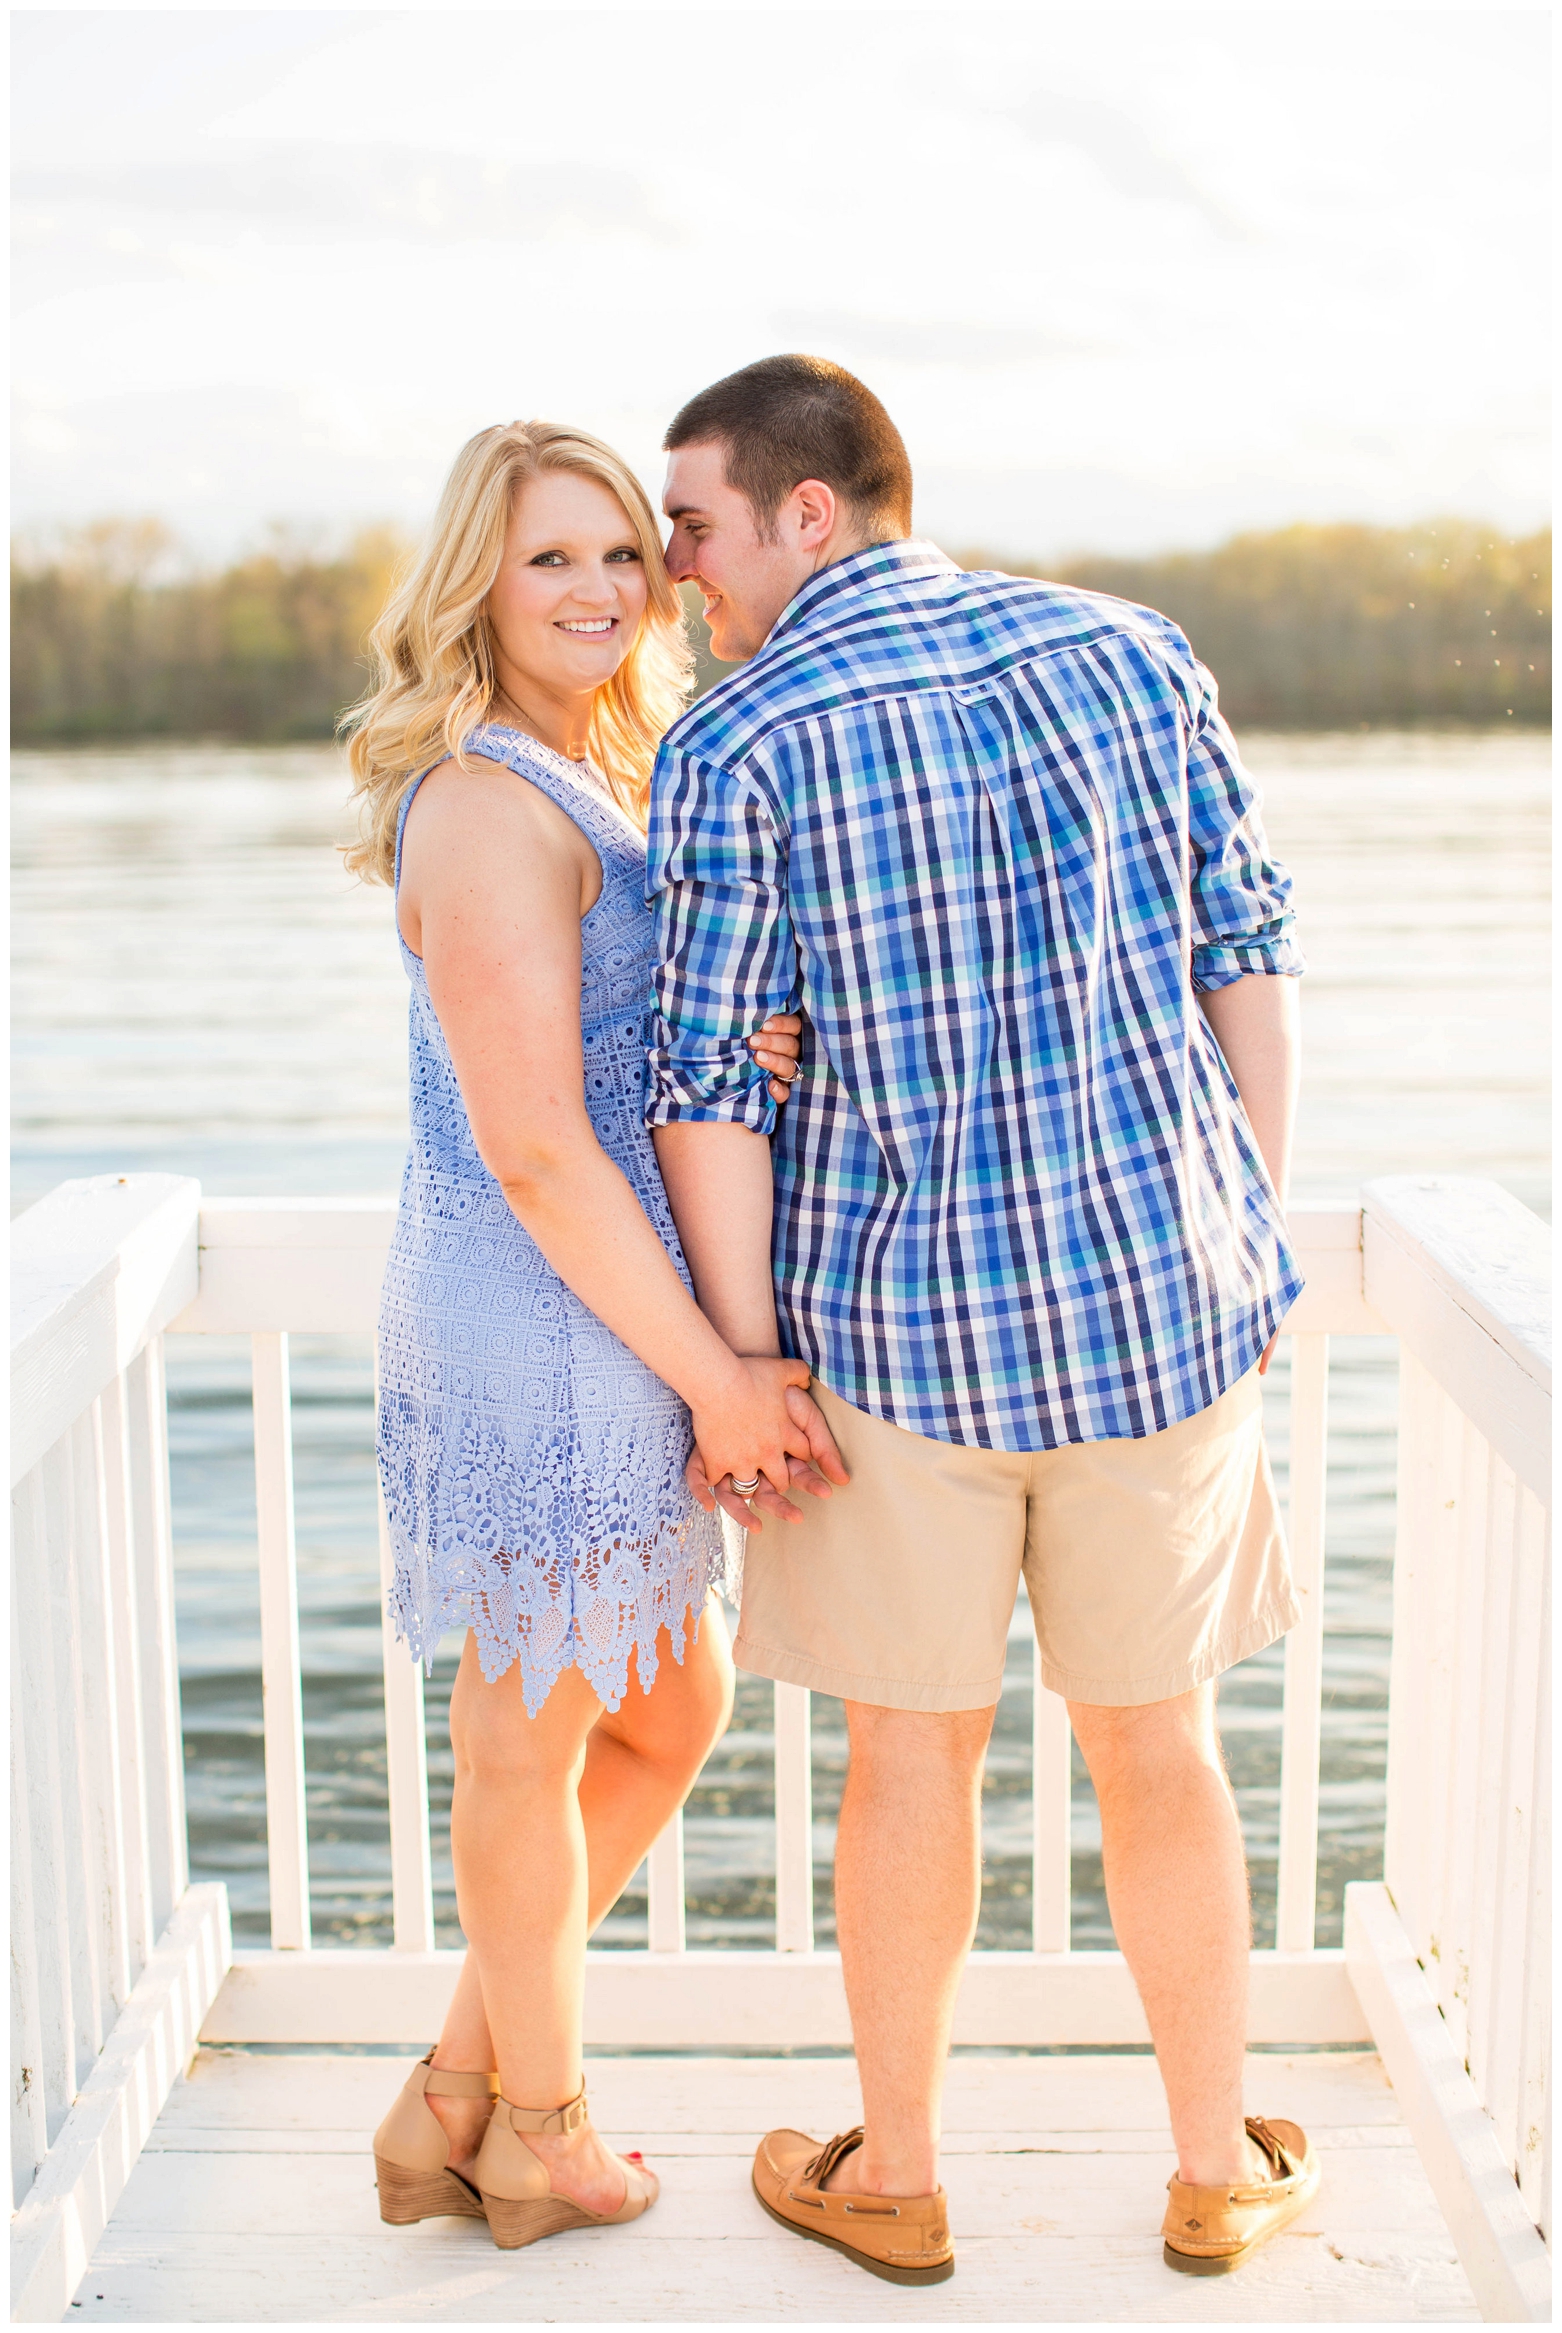 View More: http://hopetaylorphotographyphotos.pass.us/meagan-and-justin-engagement